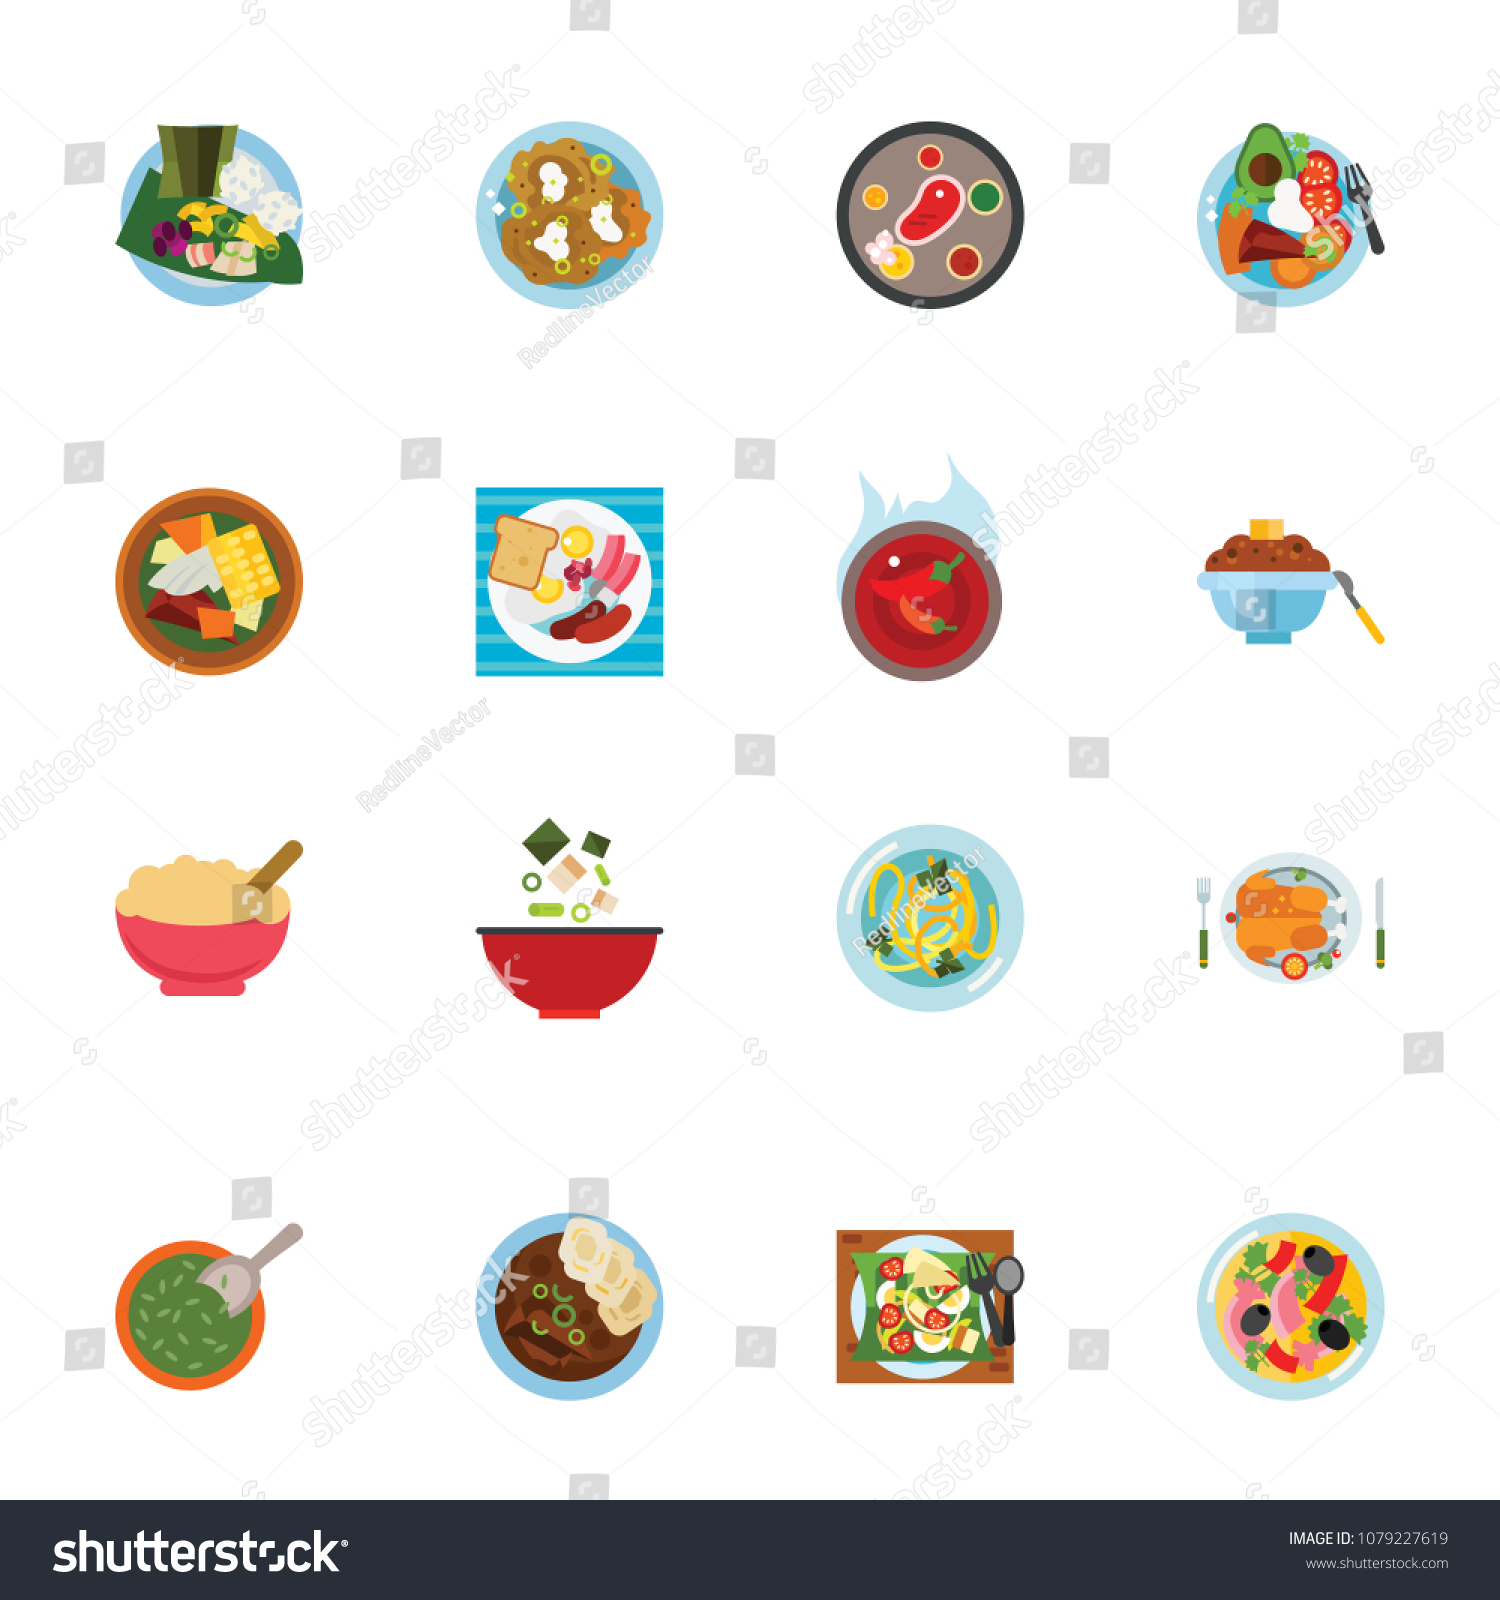 SVG of Traditional lunch in different countries. Colorful flat icon set. National dish, traditional cuisine, recipe. Dish concept. For topics like food, cooking, traditional culture svg